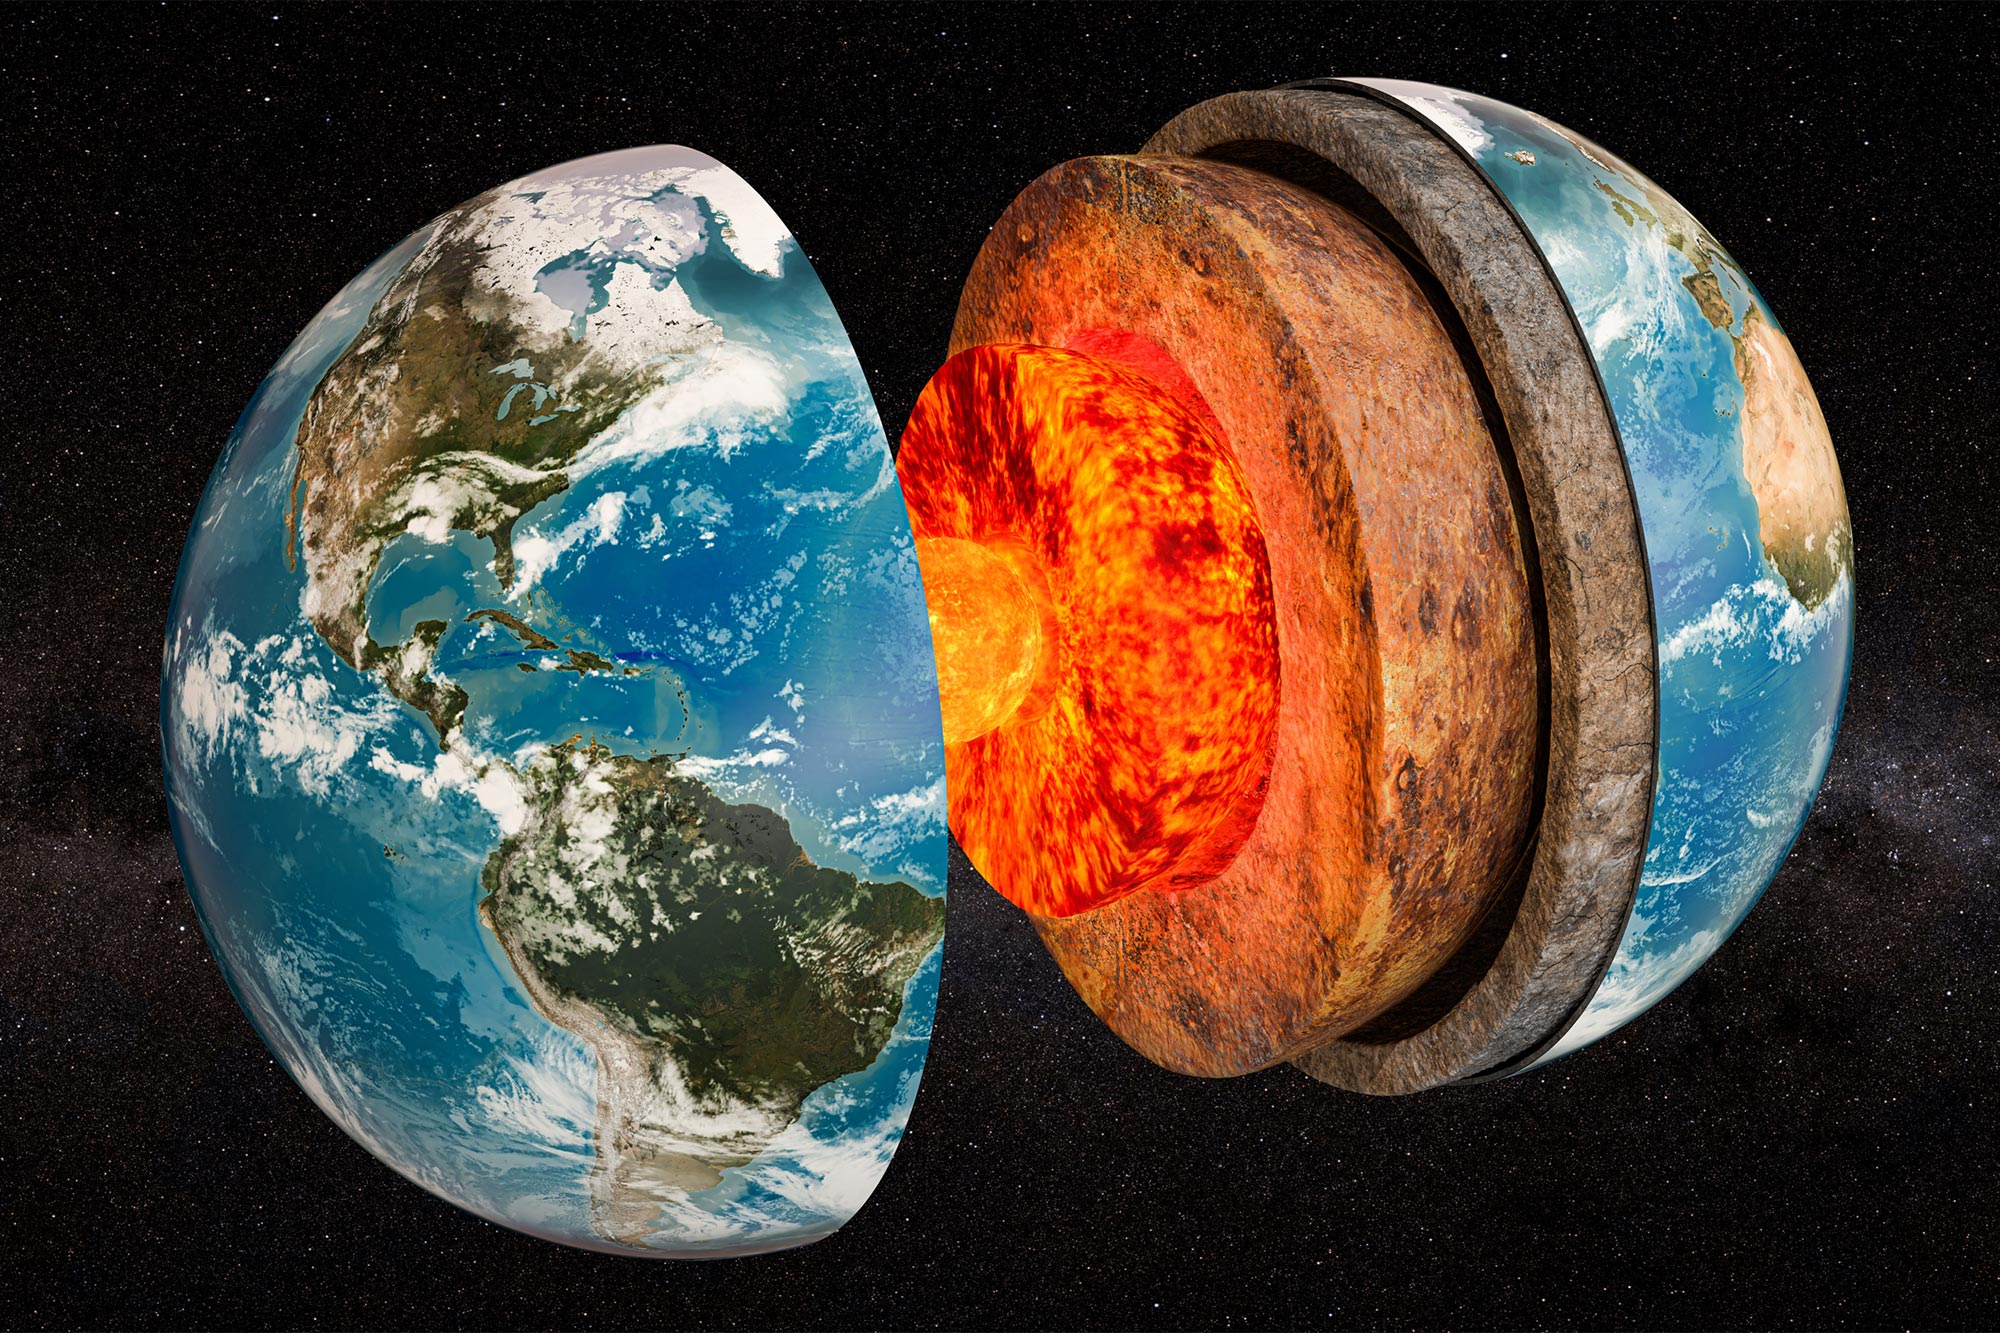 New research contradicts established theories about the evolution of the Earth’s crust